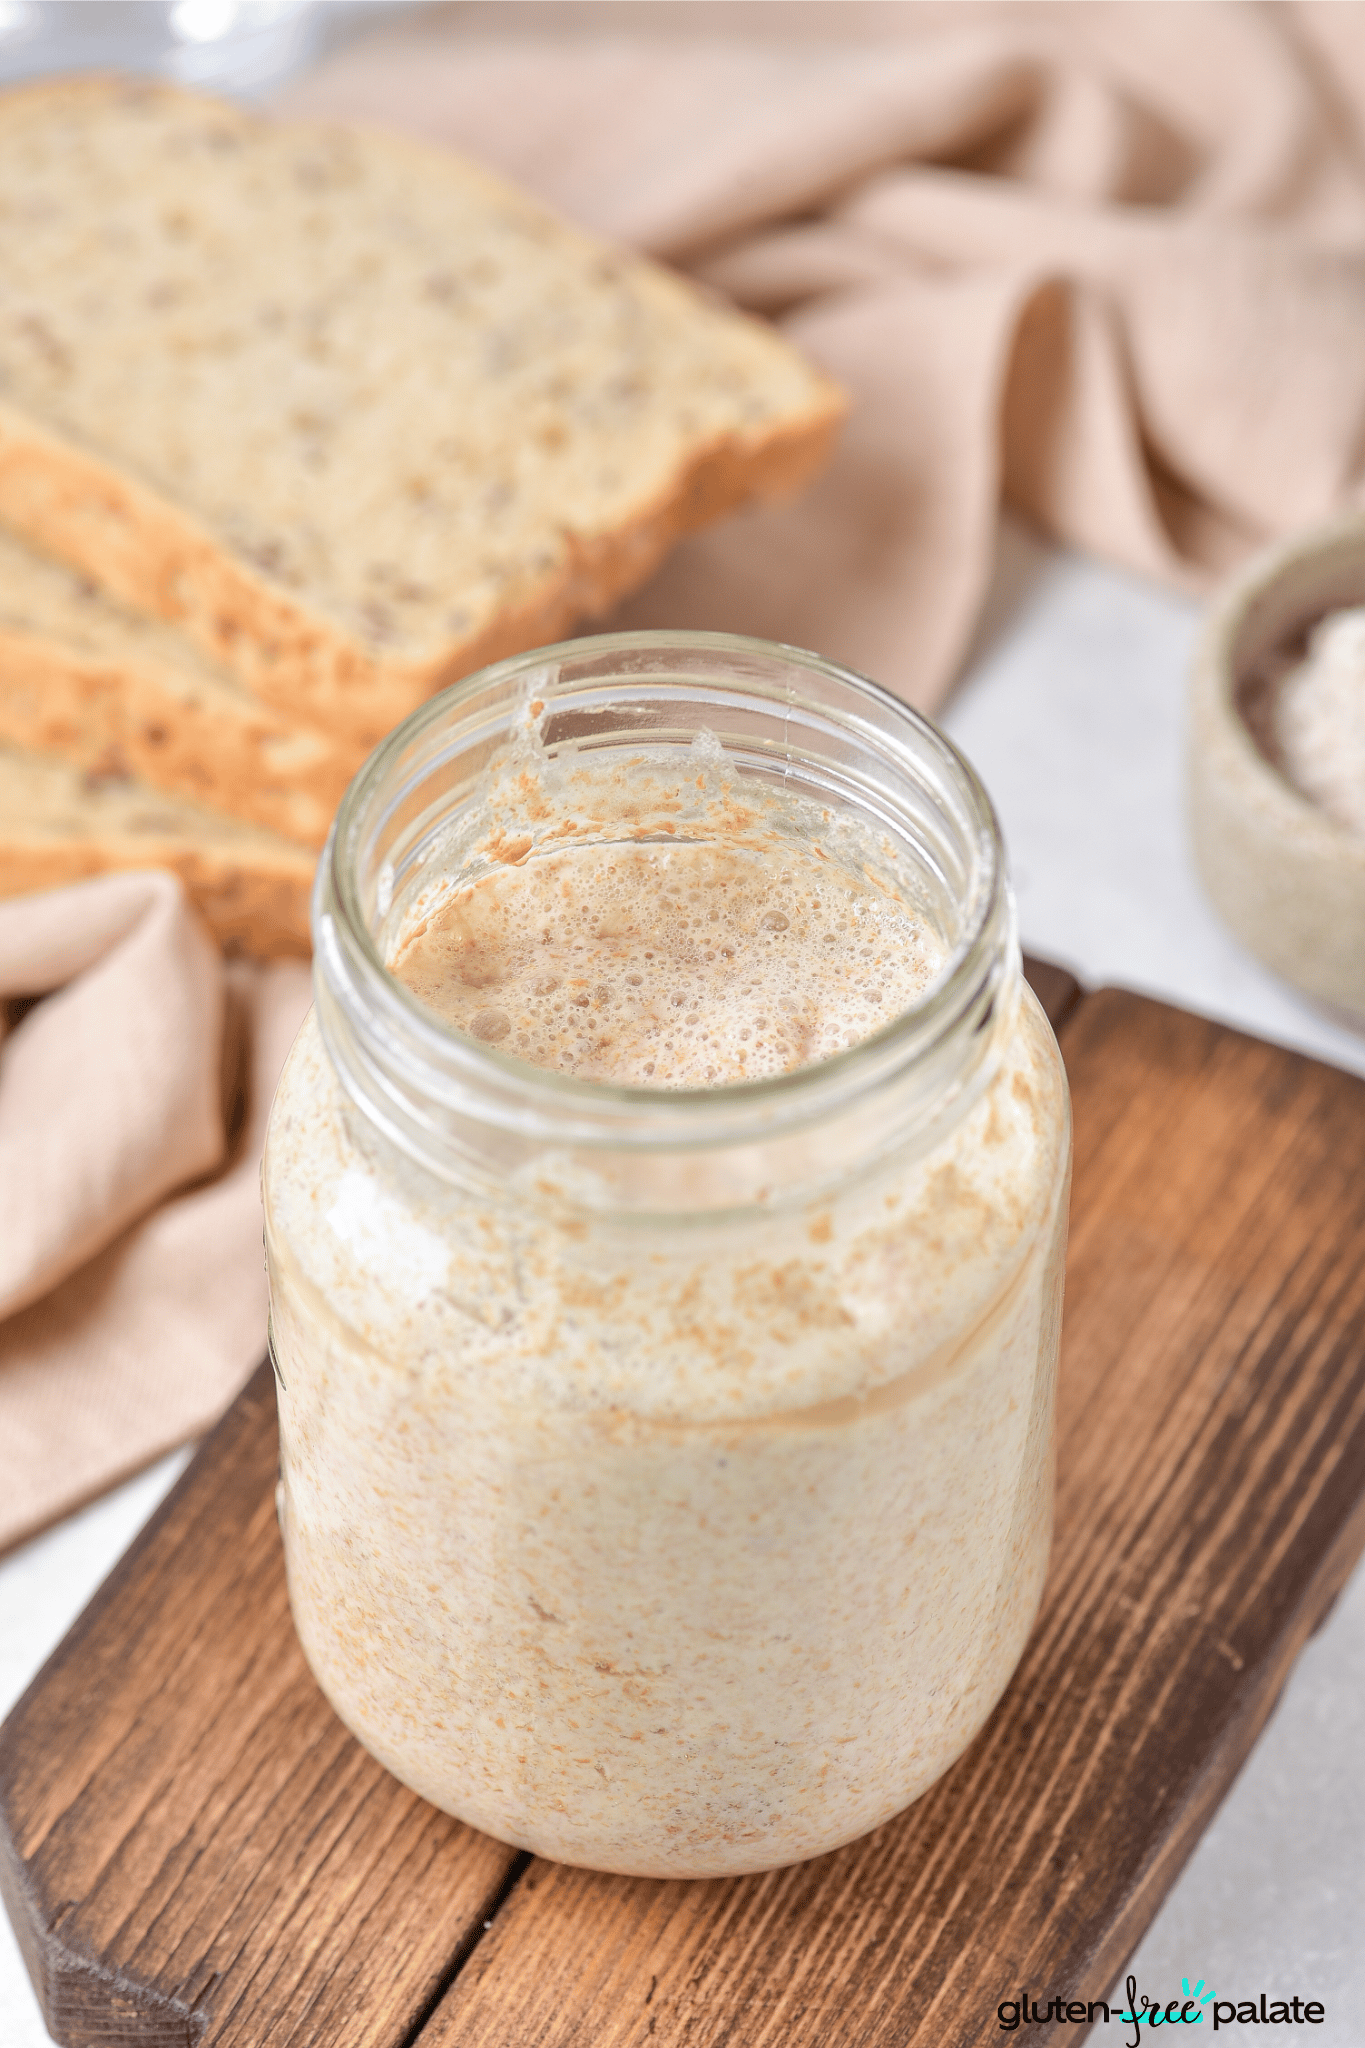 gluten-free sourdough starter in a jar with bread in the background.